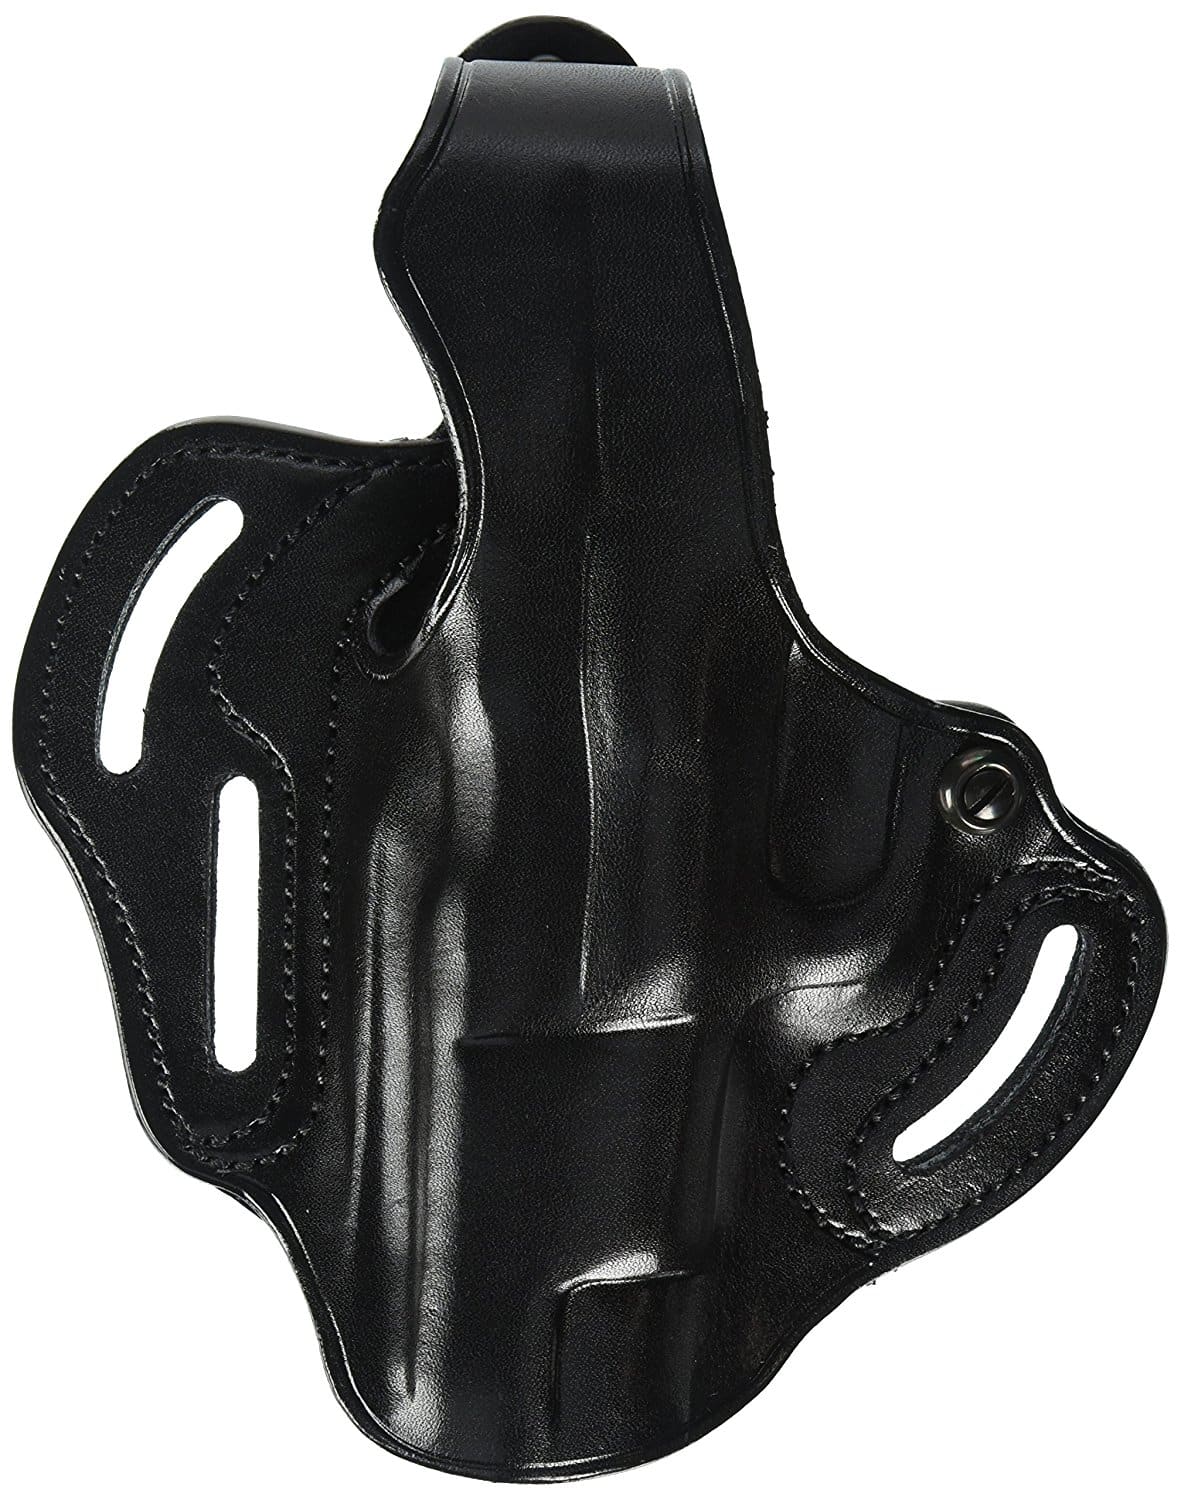  Galco Cop 3 Slot Holster for Ruger